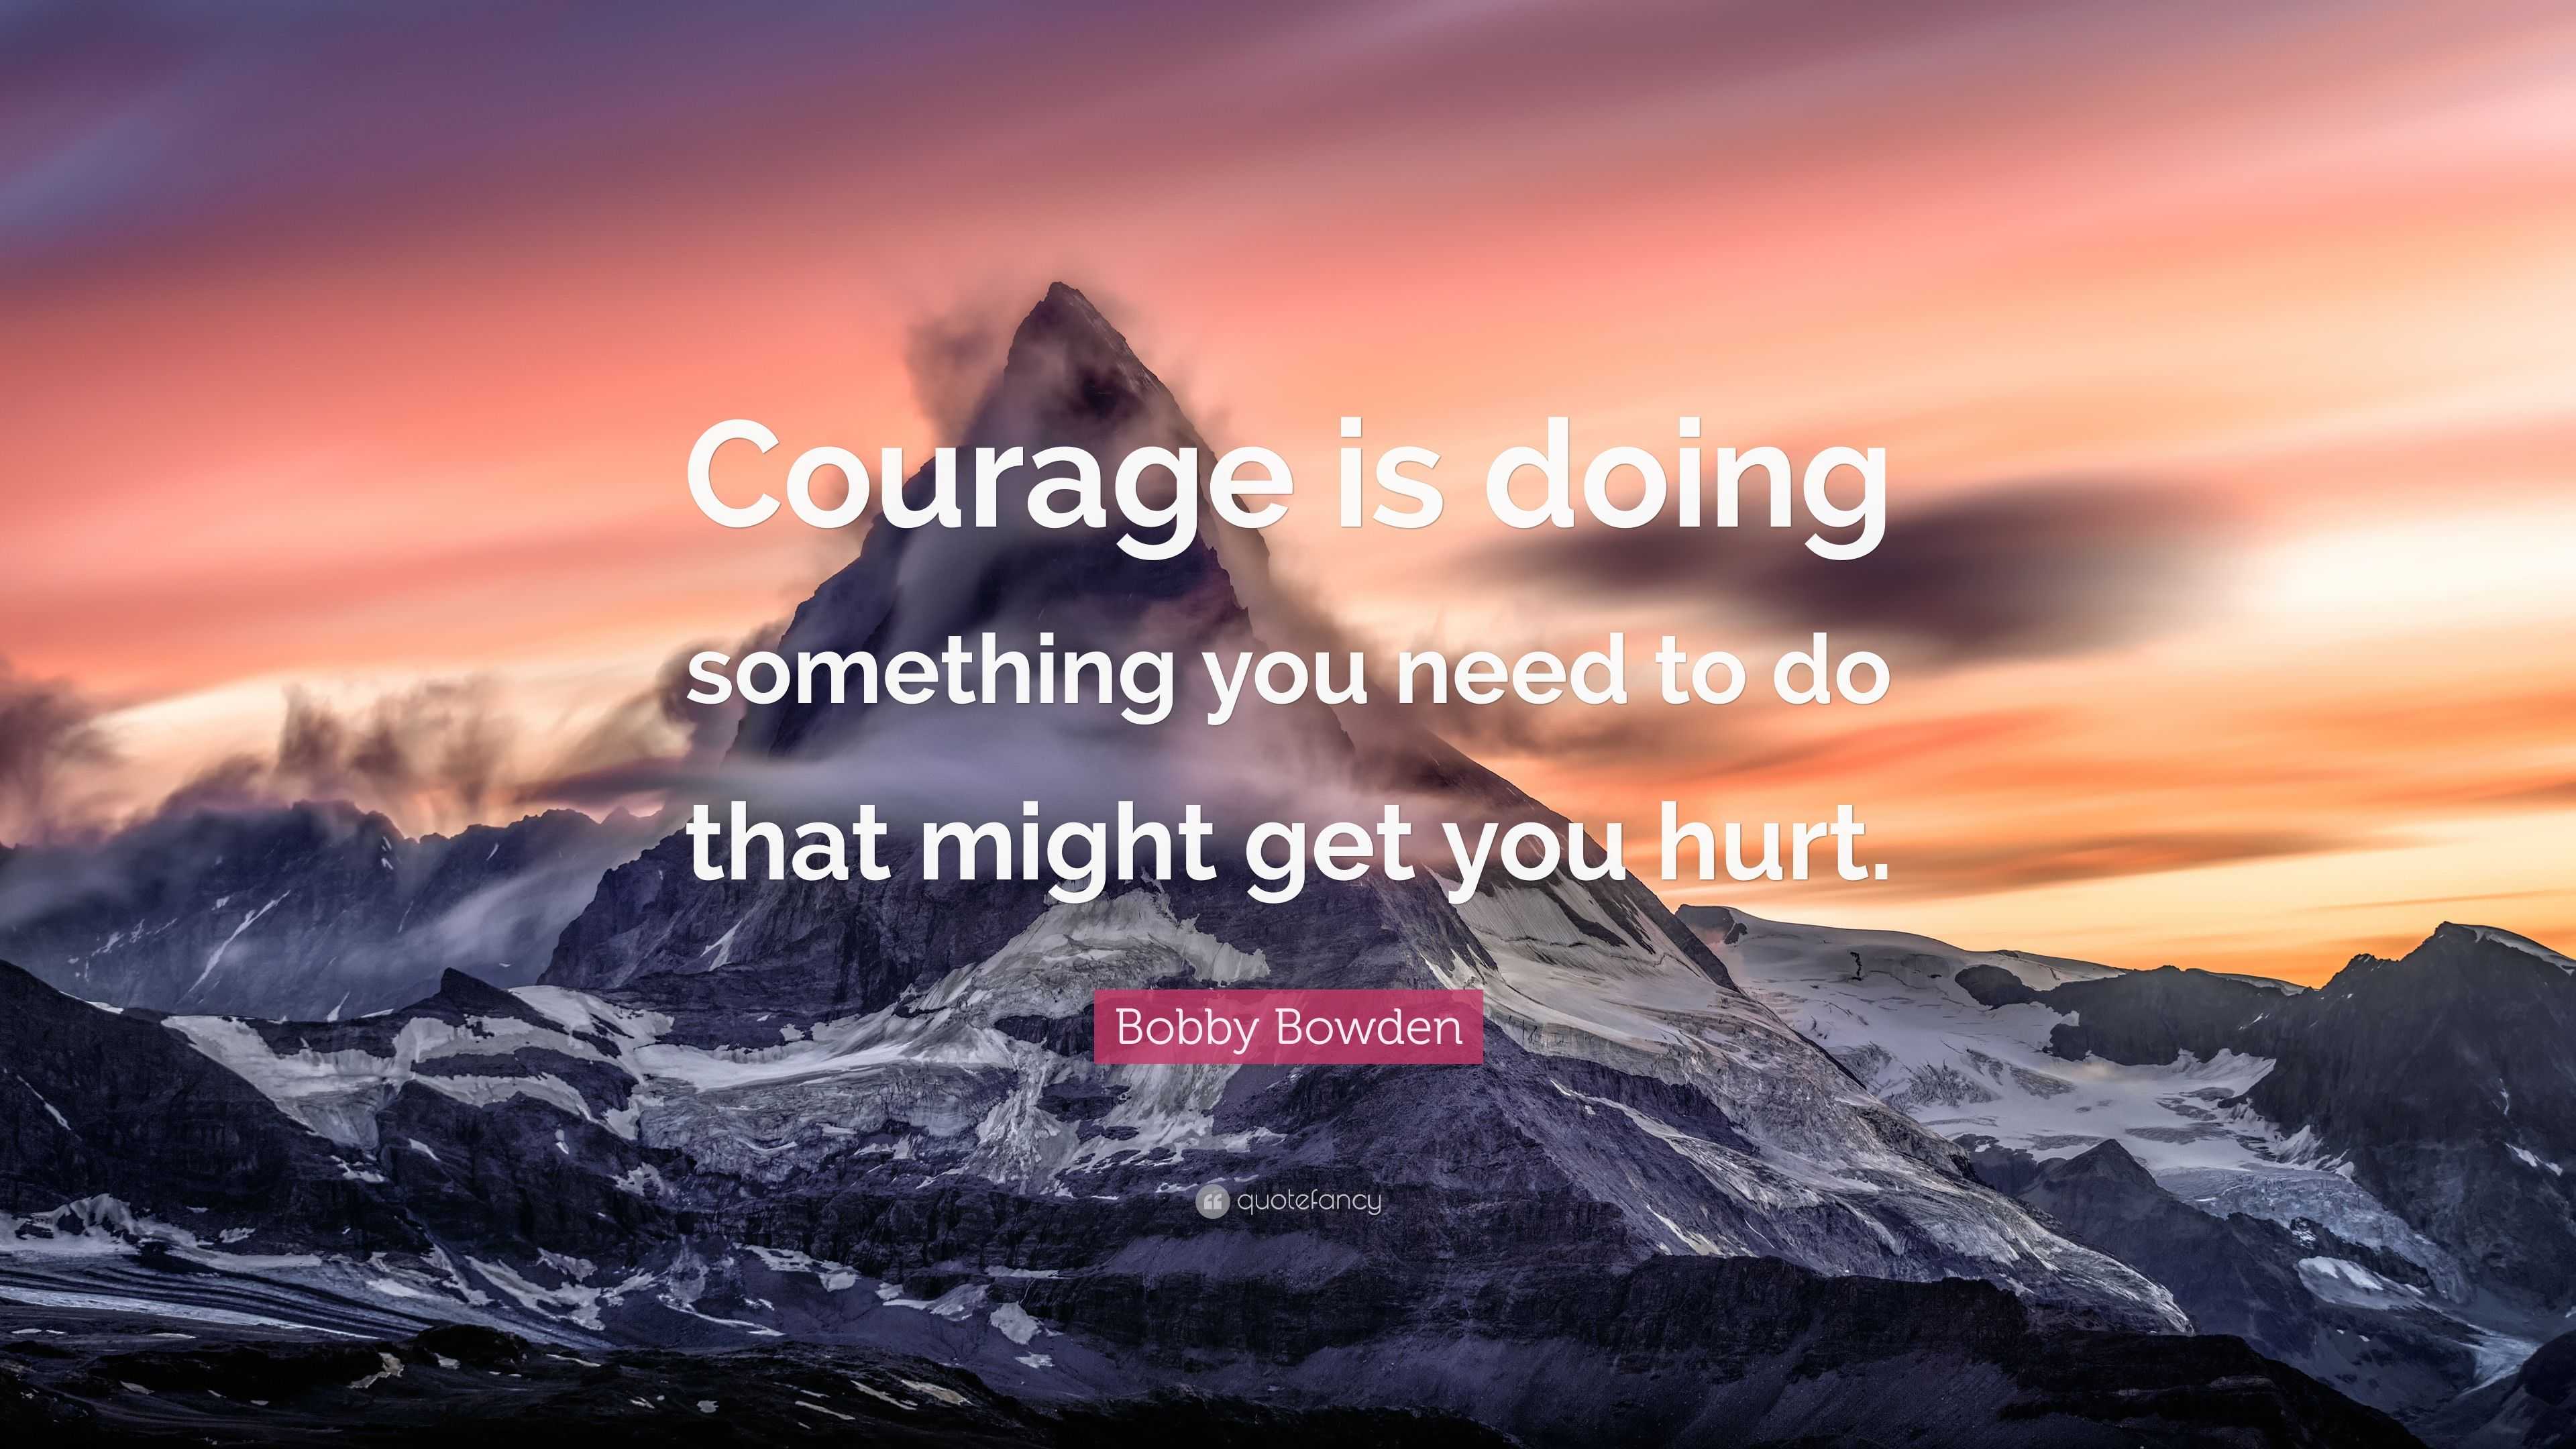 Bobby Bowden Quote: “Courage is doing something you need to do that ...